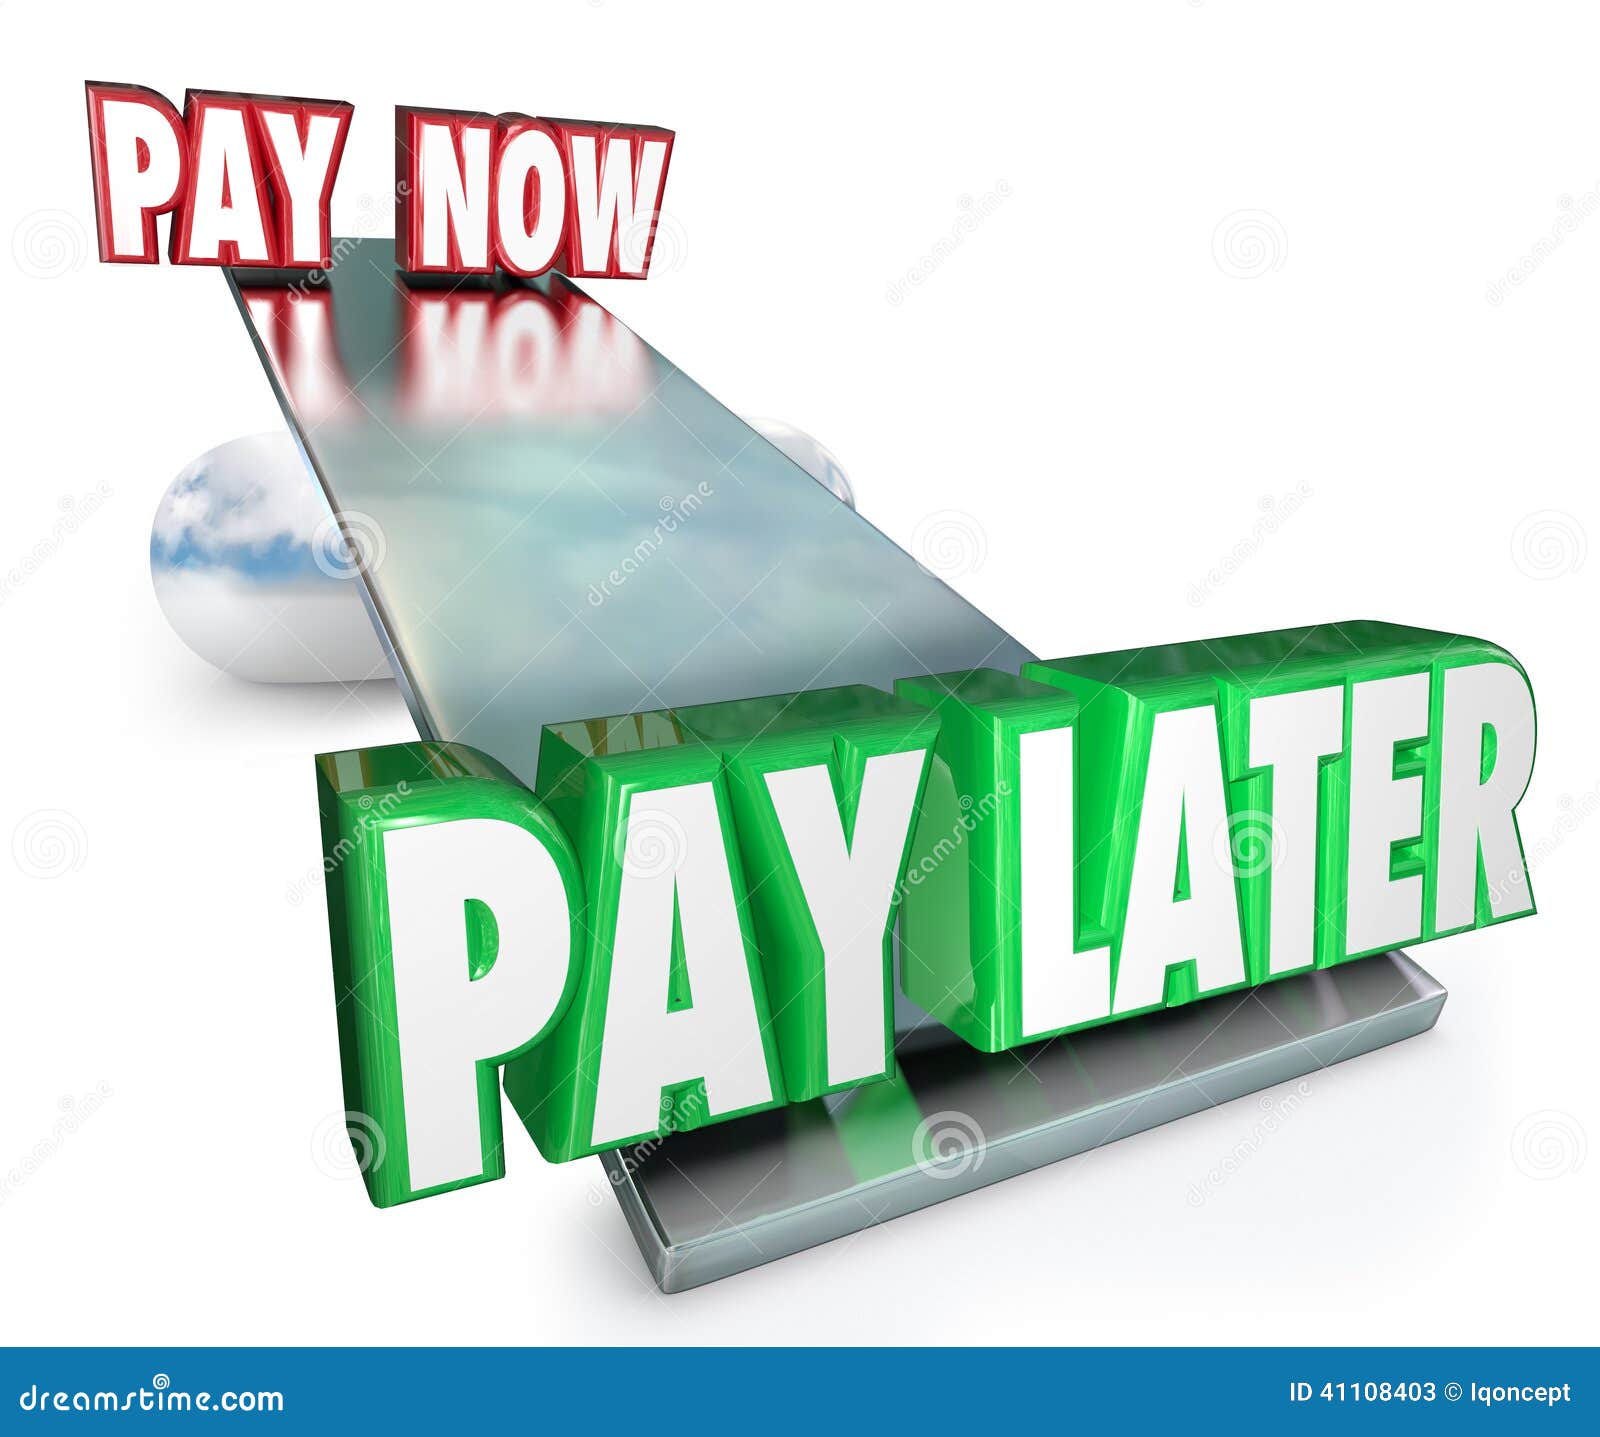 pay now vs later delay payments borrow credit installment plan